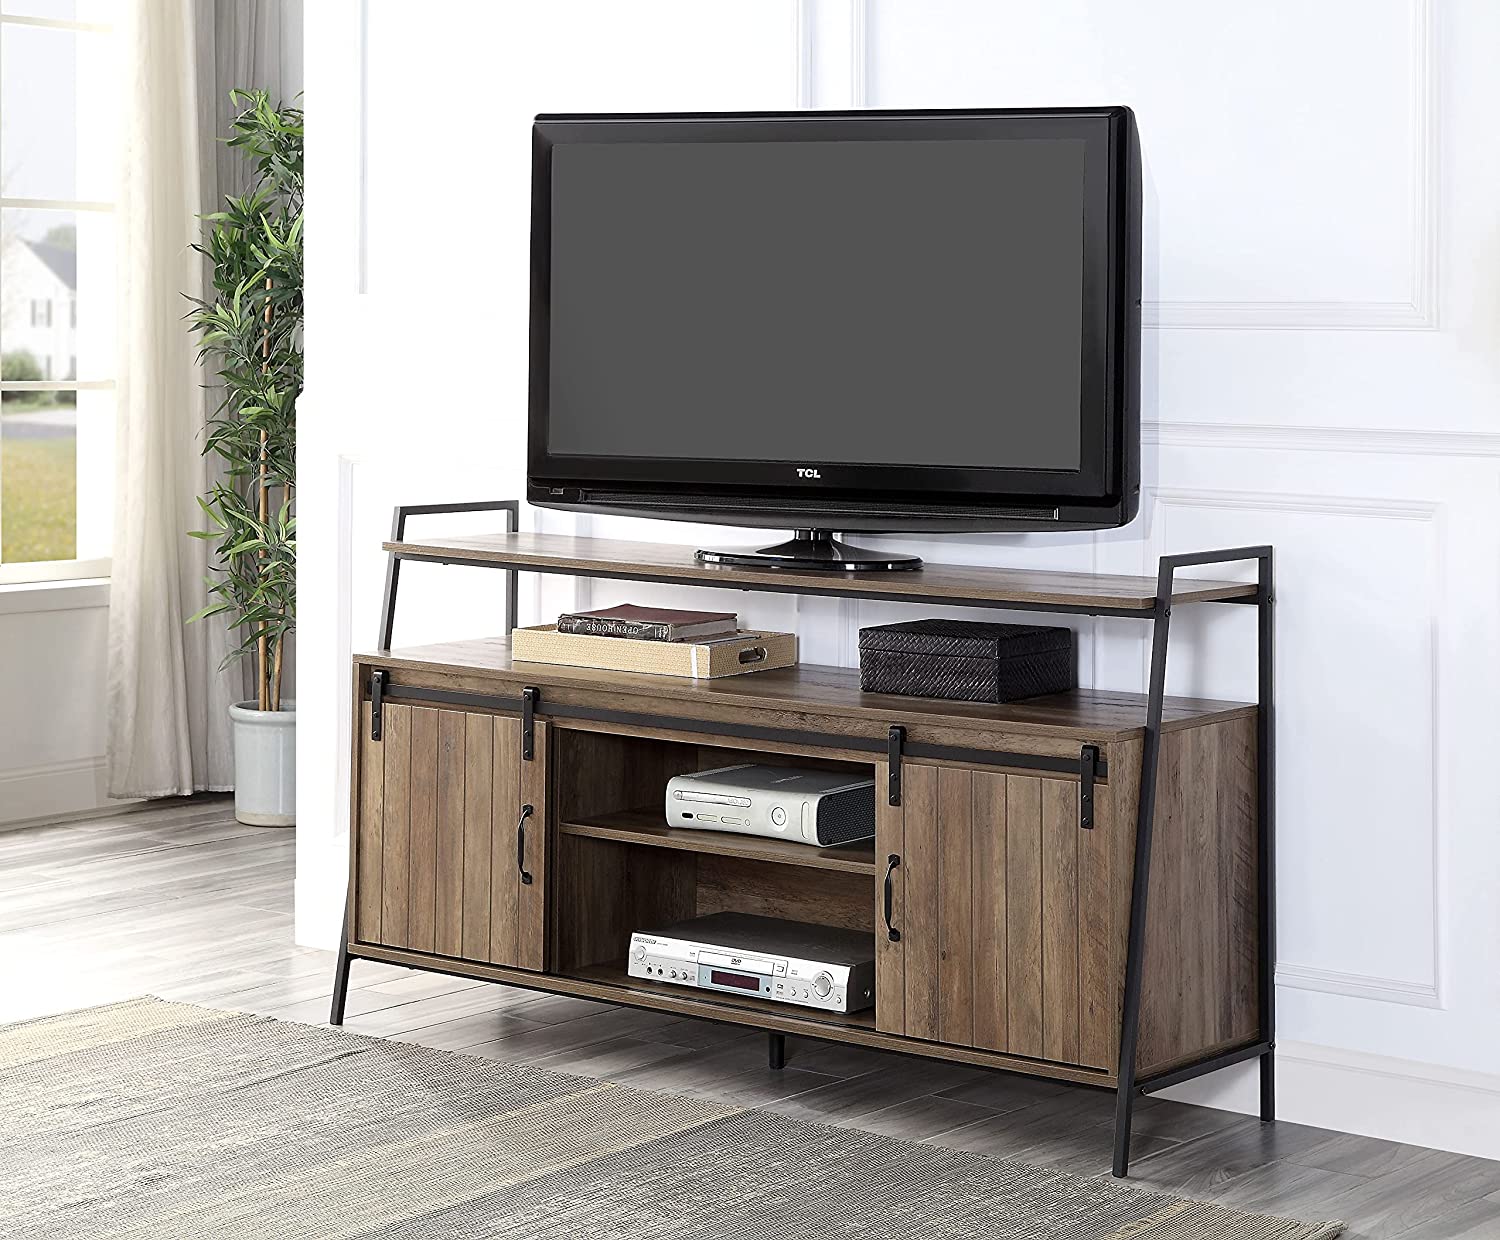 Knocbel Industrial 60in TV Stand Television Console Table Storage Cabinet with Sliding Barn Doors and Compartments